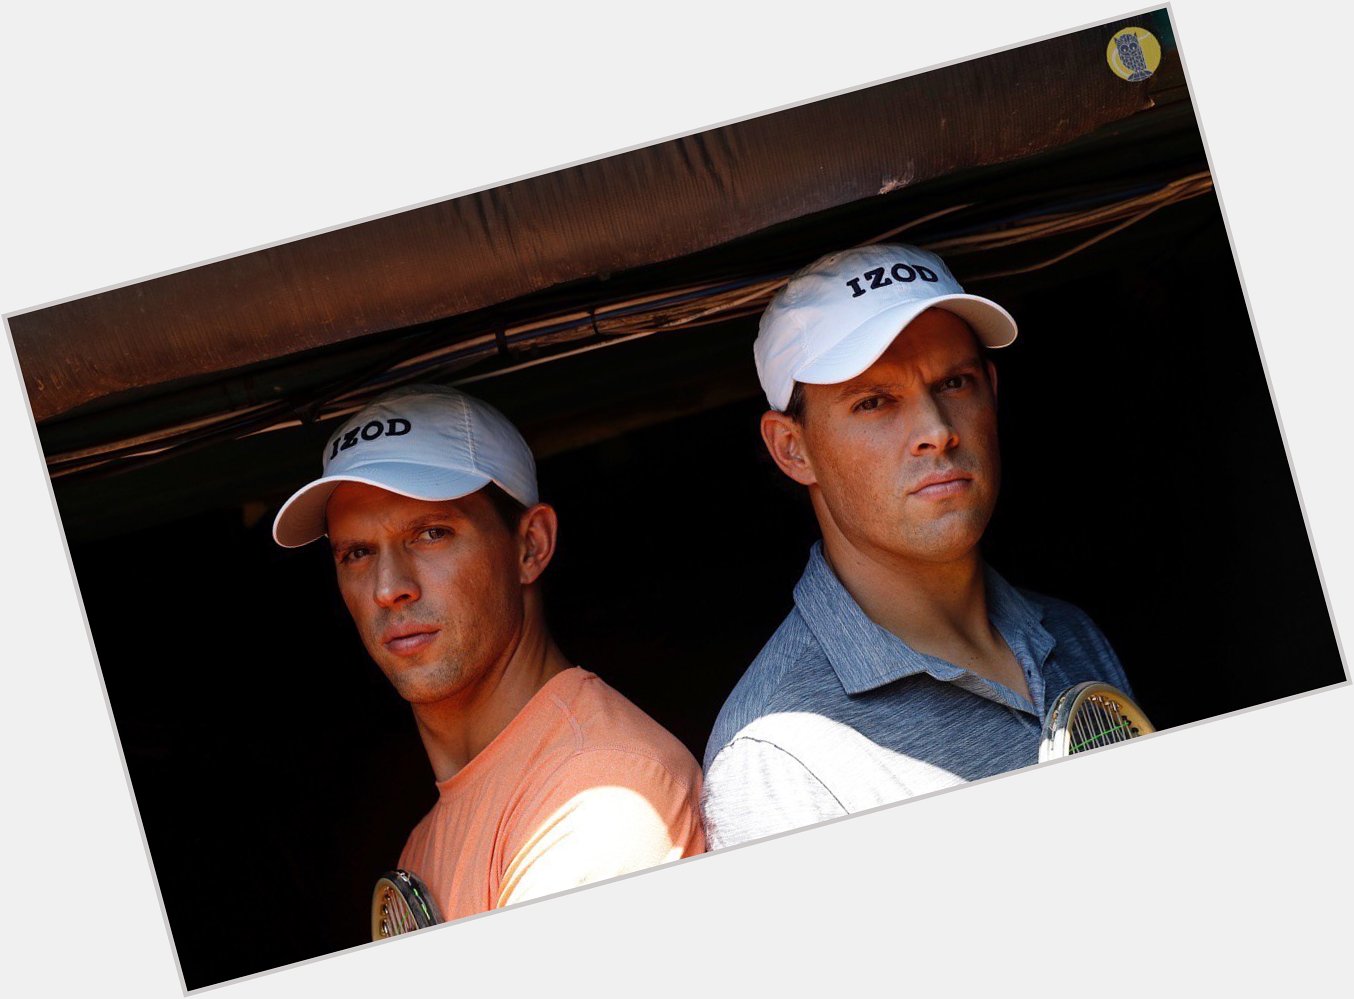 Sending very happy birthday wishes to our six-time doubles champions, Bob and Mike Bryan! 